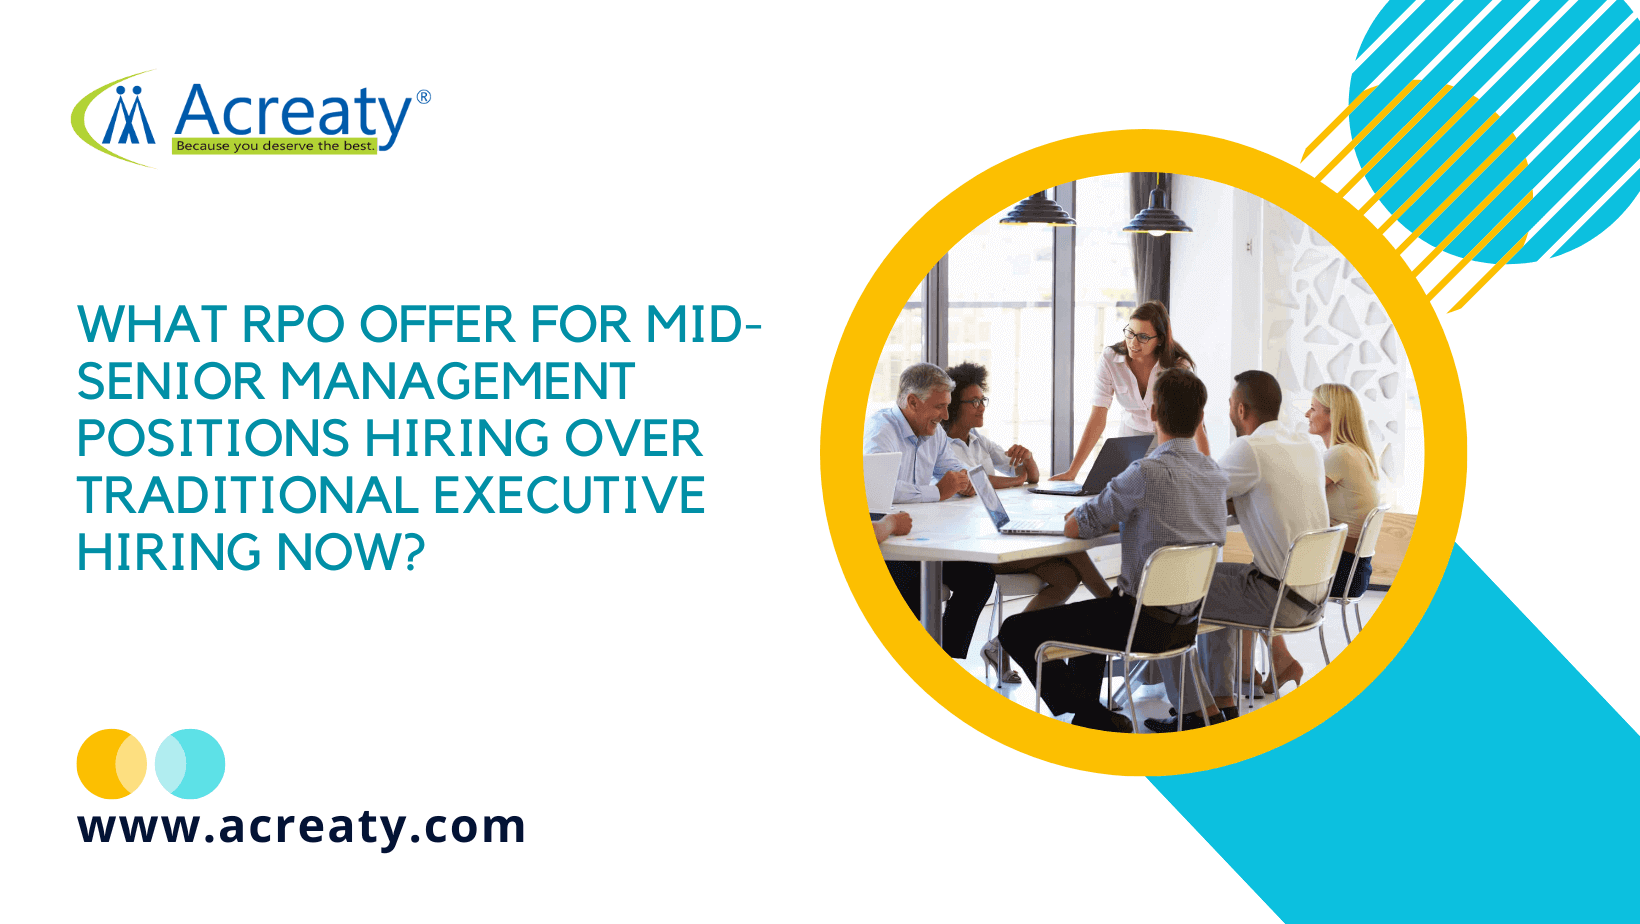 What RPO offer for Mid-Senior Management Positions hiring over traditional Executive Hiring now?